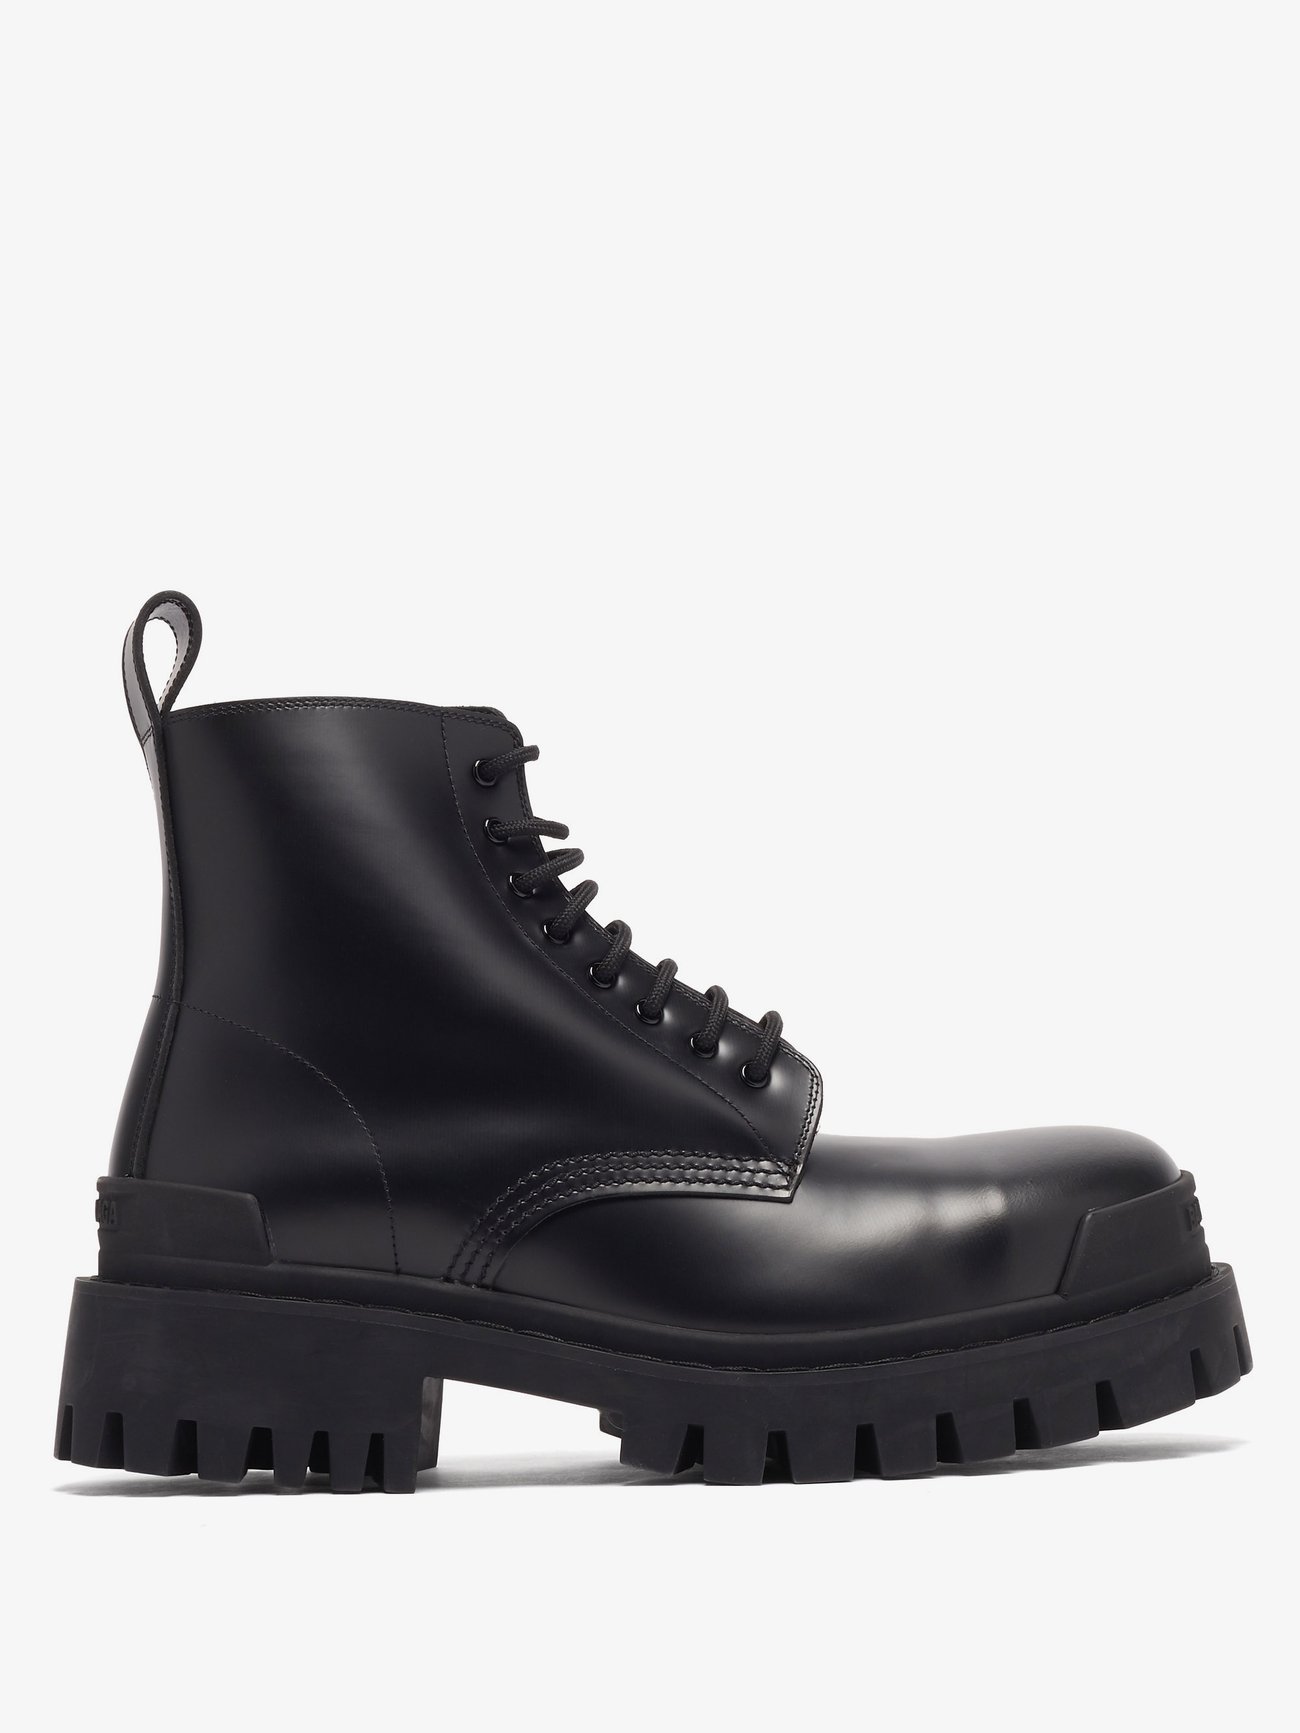 Strike leather combat boots